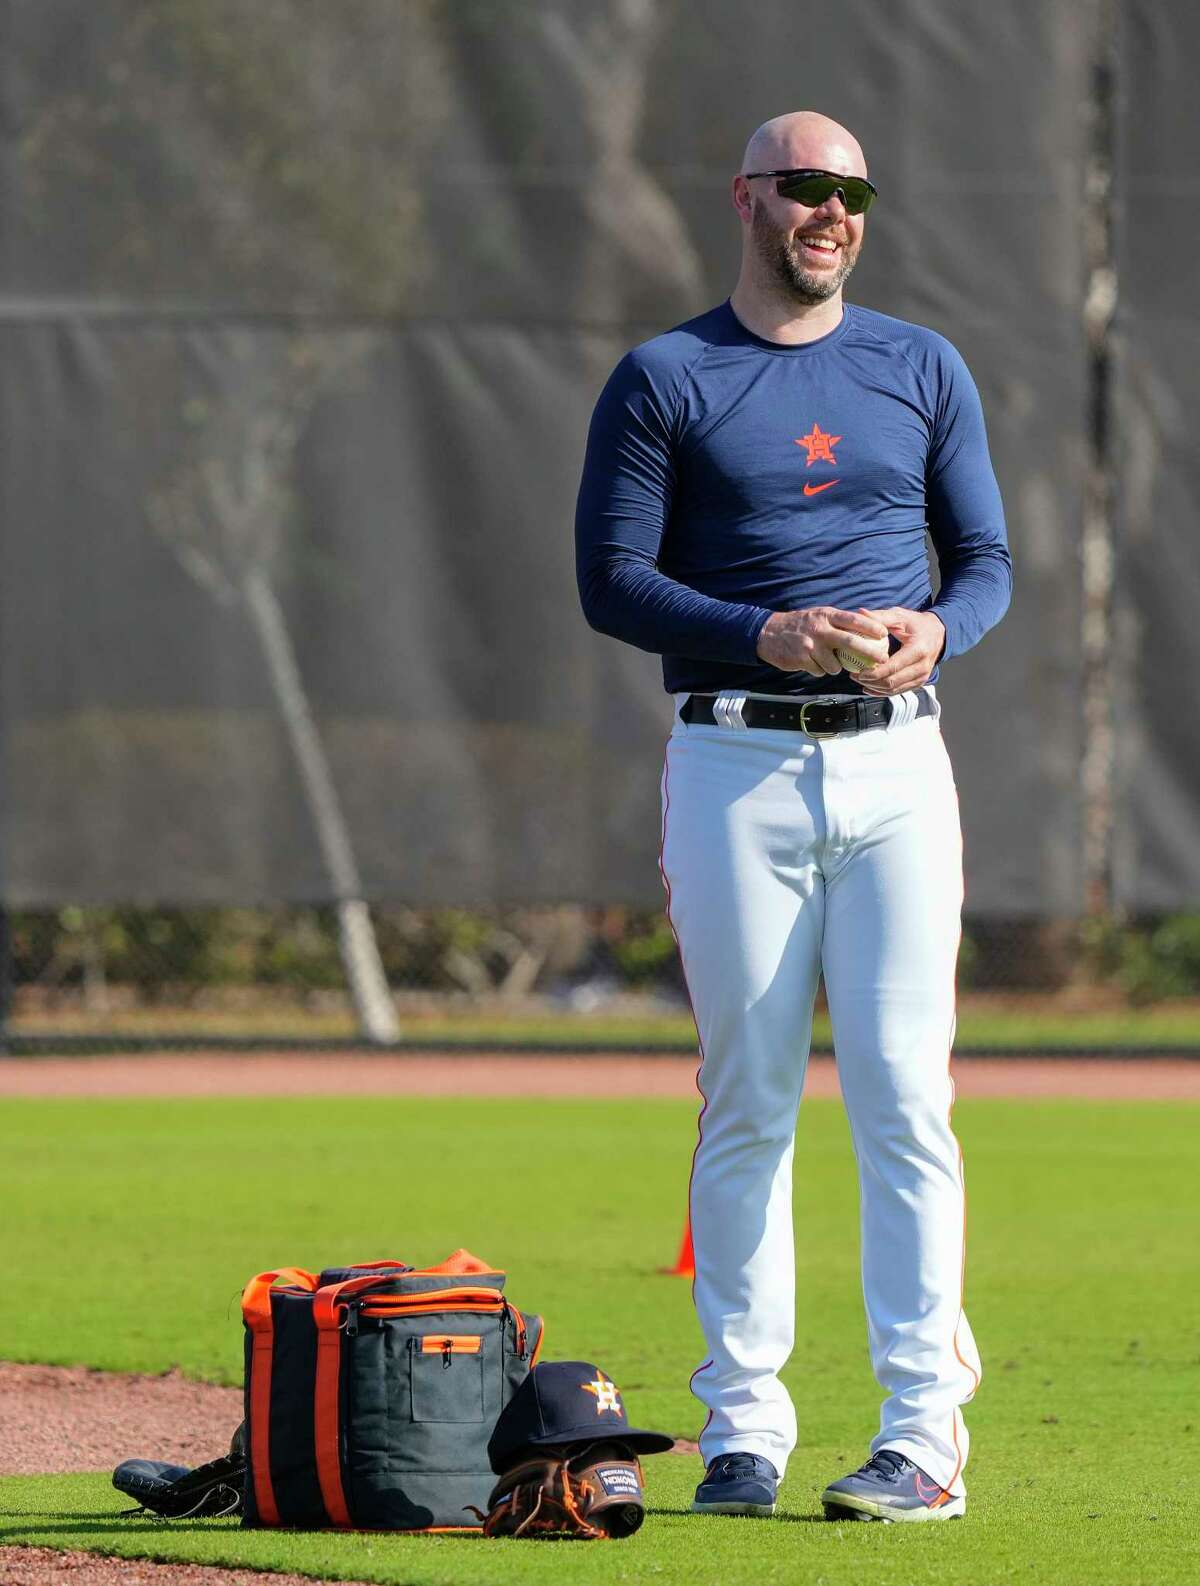 Houston Astros pitcher Ryan Pressly warms up during workouts at the Astros spring training complex at The Ballpark of the Palm Beaches on Saturday, Feb. 18, 2023 in West Palm Beach .